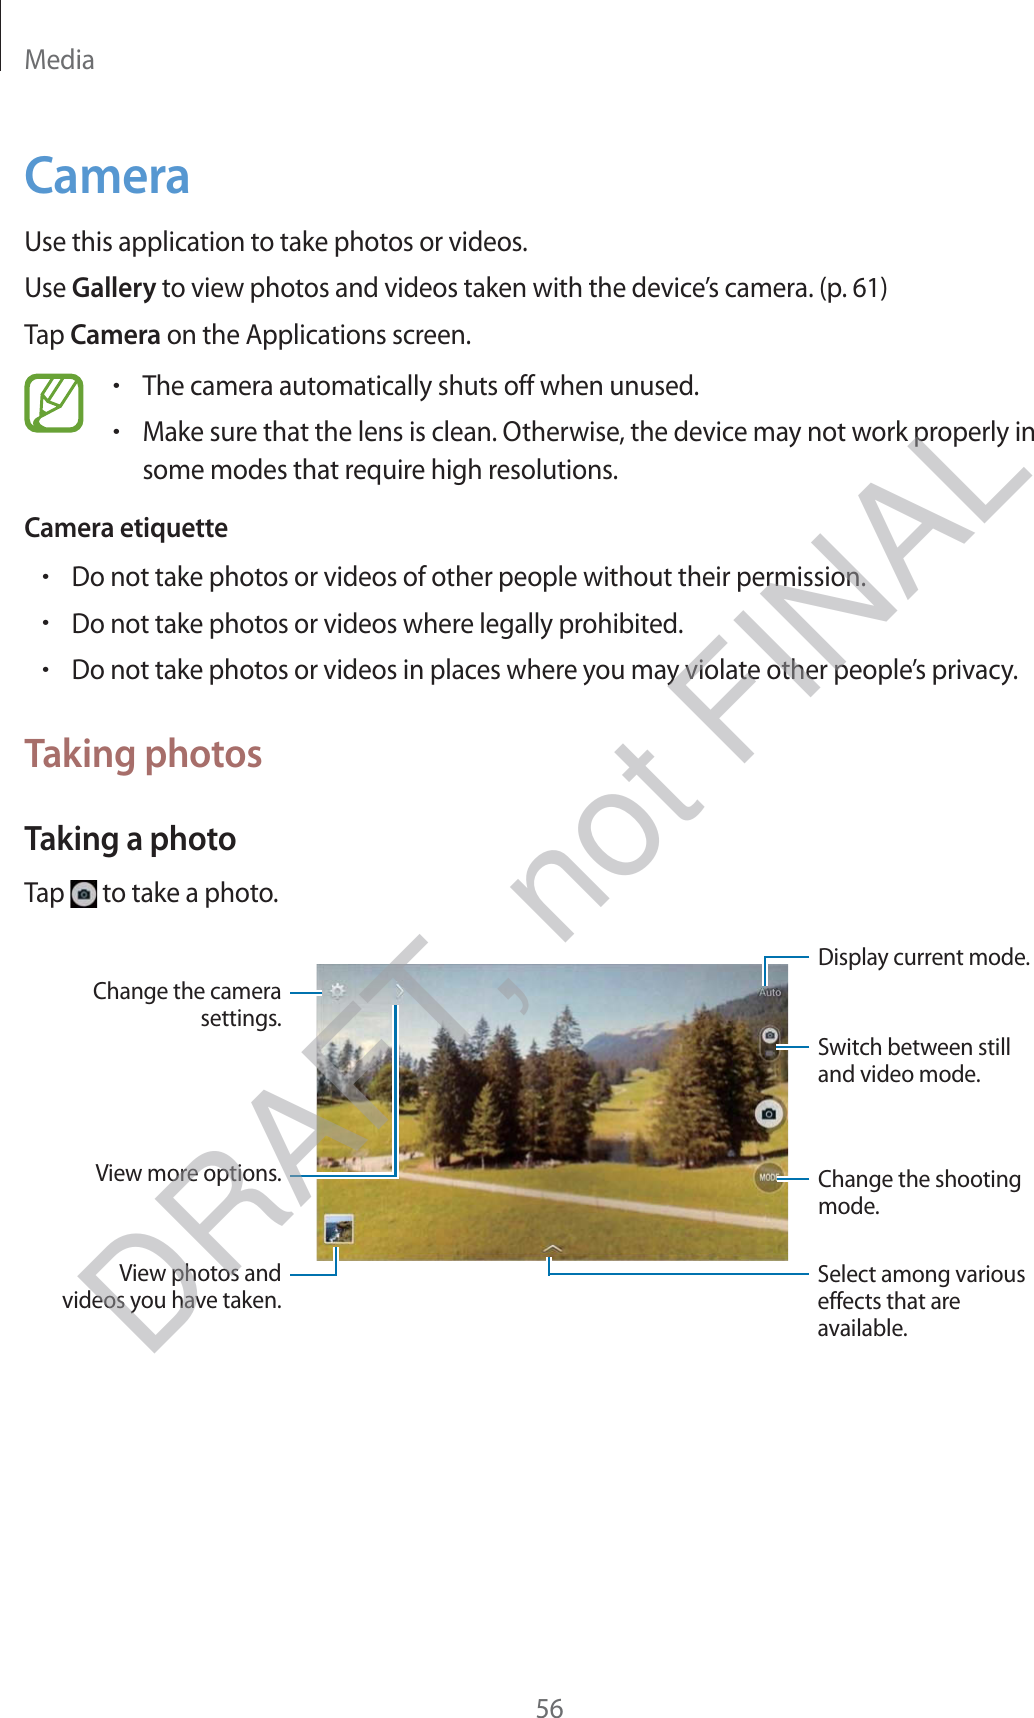 Media56CameraUse this application to take photos or videos.Use Gallery to view photos and videos taken with the device’s camera. (p. 61)Tap Camera on the Applications screen.rThe camera automatically shuts off when unused.rMake sure that the lens is clean. Otherwise, the device may not work properly in some modes that require high resolutions.Camera etiquetterDo not take photos or videos of other people without their permission.rDo not take photos or videos where legally prohibited.rDo not take photos or videos in places where you may violate other people’s privacy.Taking photosTaking a photoTap   to take a photo.Display current mode.Change the shooting mode.Change the camera settings.Select among various effects that are available.View more options.Switch between still and video mode.View photos and videos you have taken.DRAFT, not FINAL